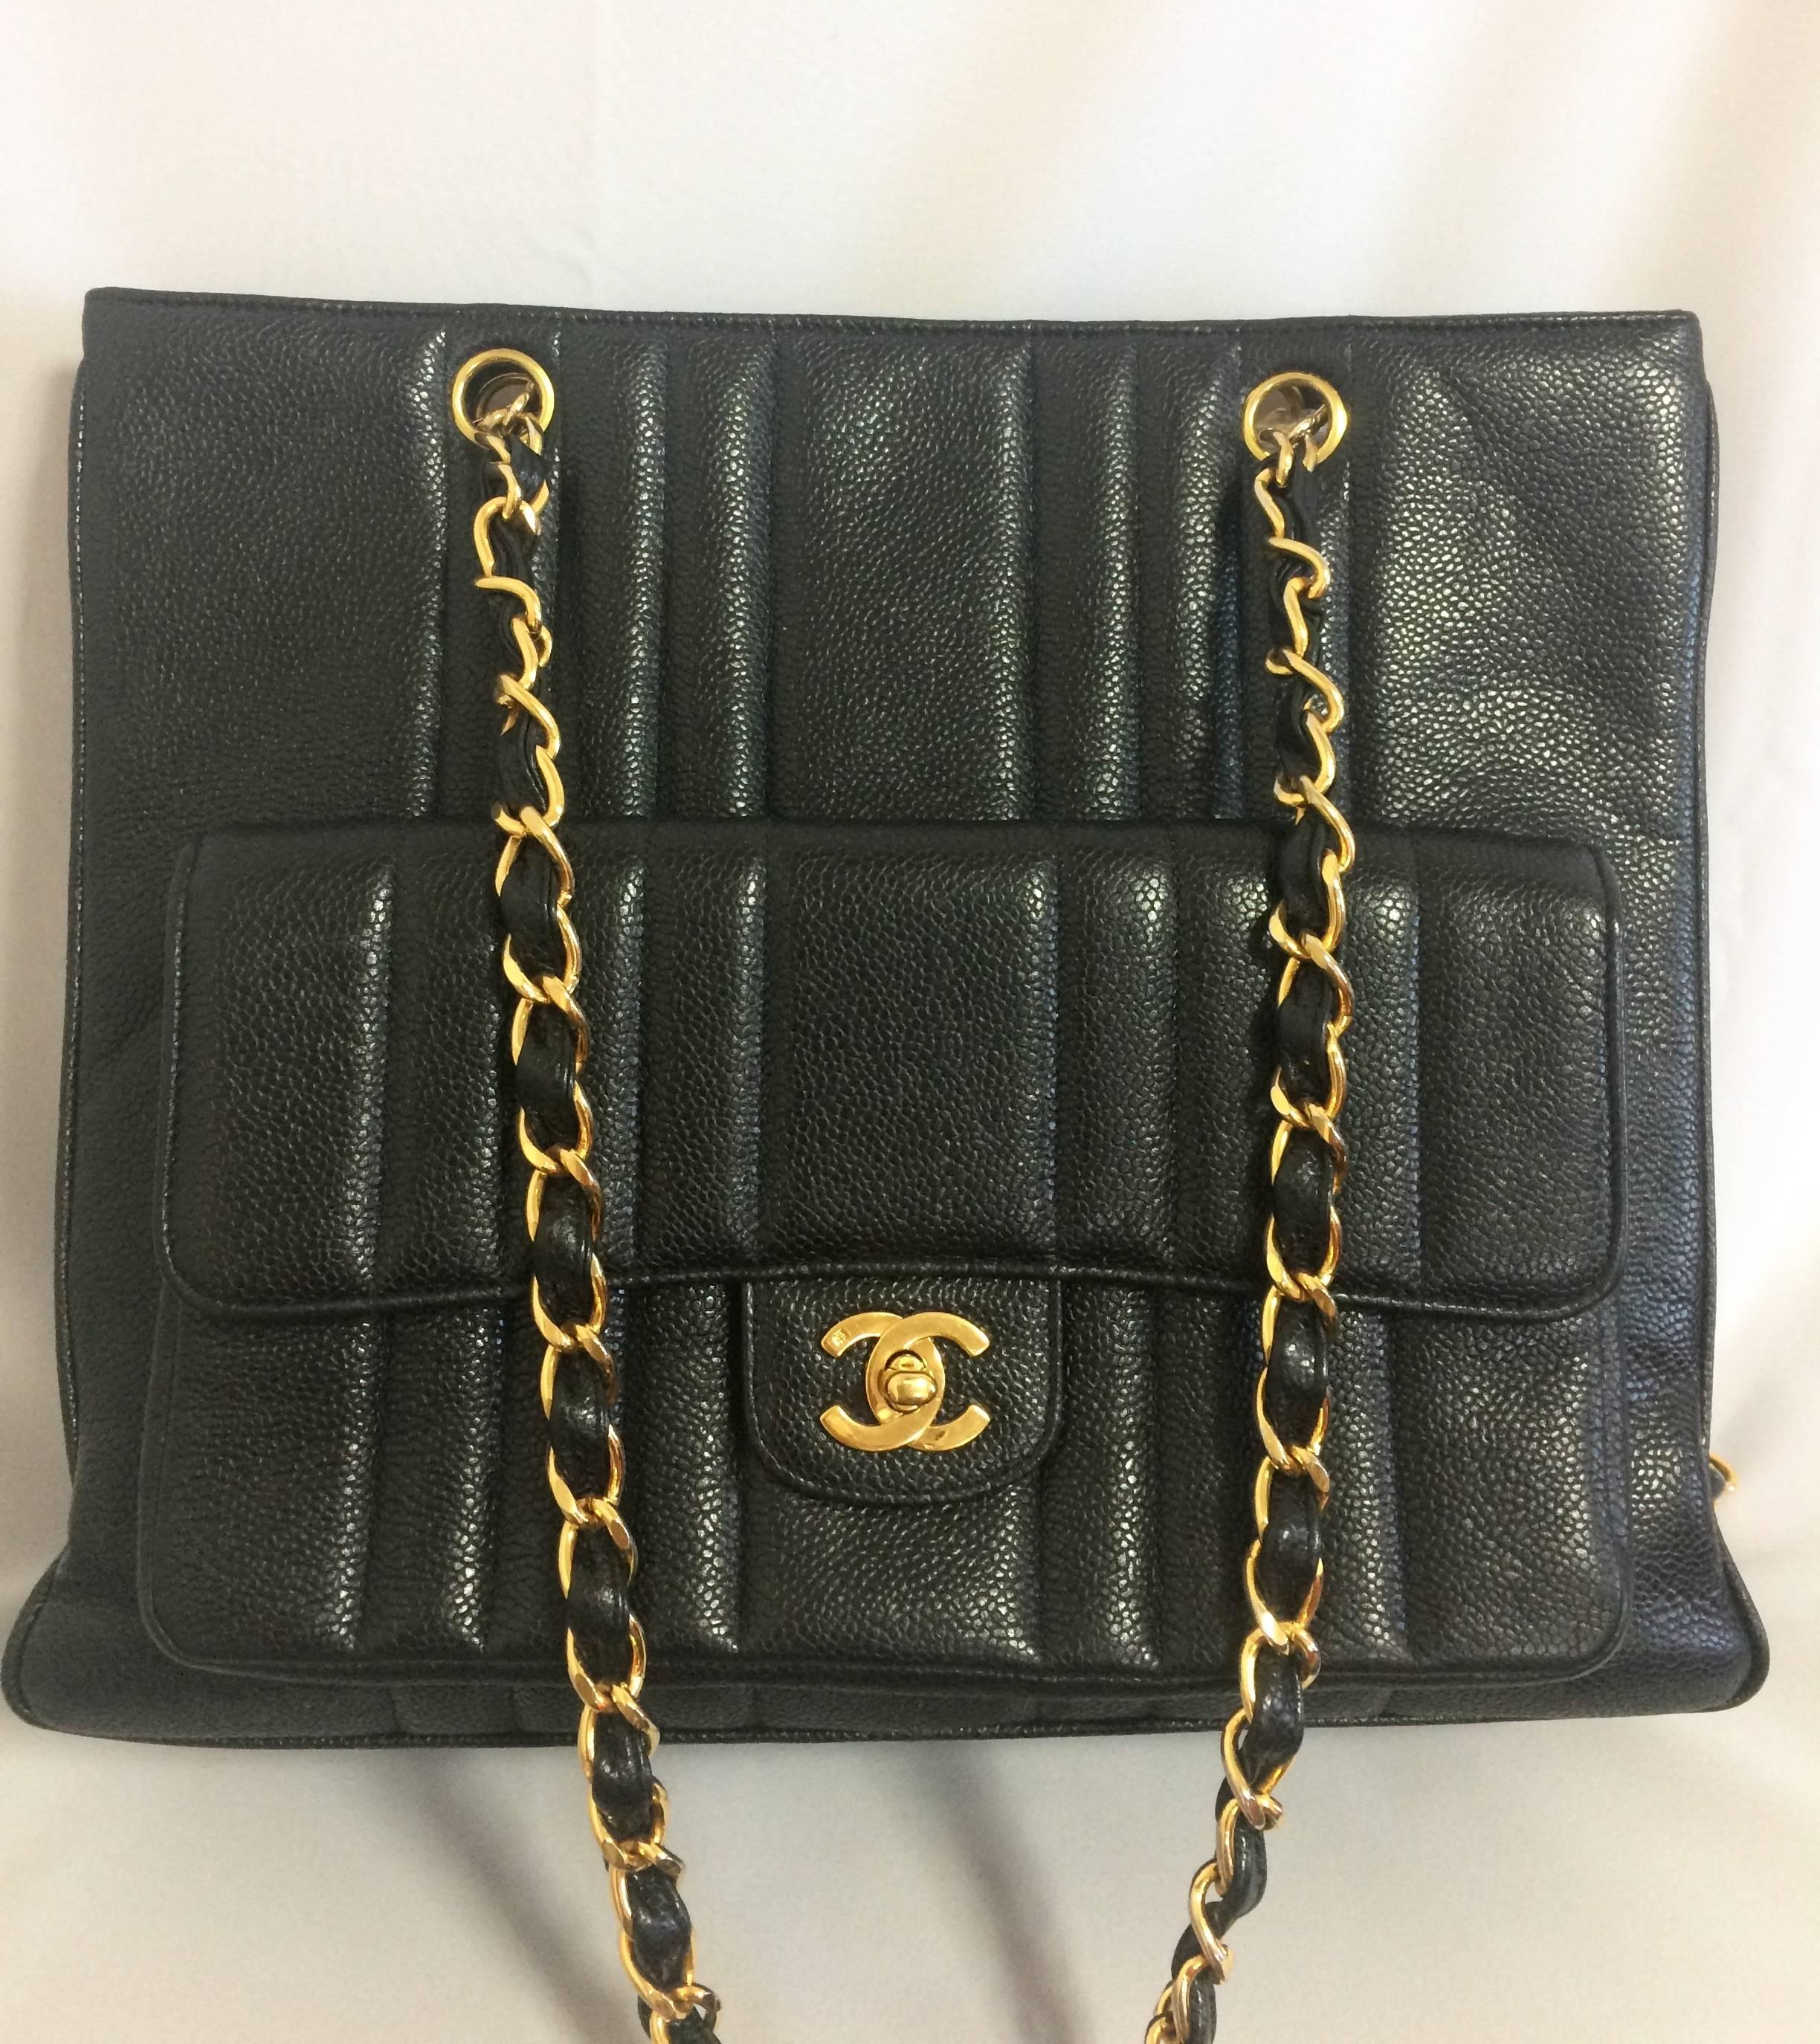 1990s. Vintage CHANEL rare 2.55 combo design black caviar leather chain shoulder bag with vertical stiches and golden CC closure hock at front pocket.

Beautiful vintage condition!
Introducing another unique vintage Chanel bag back in the approx mid